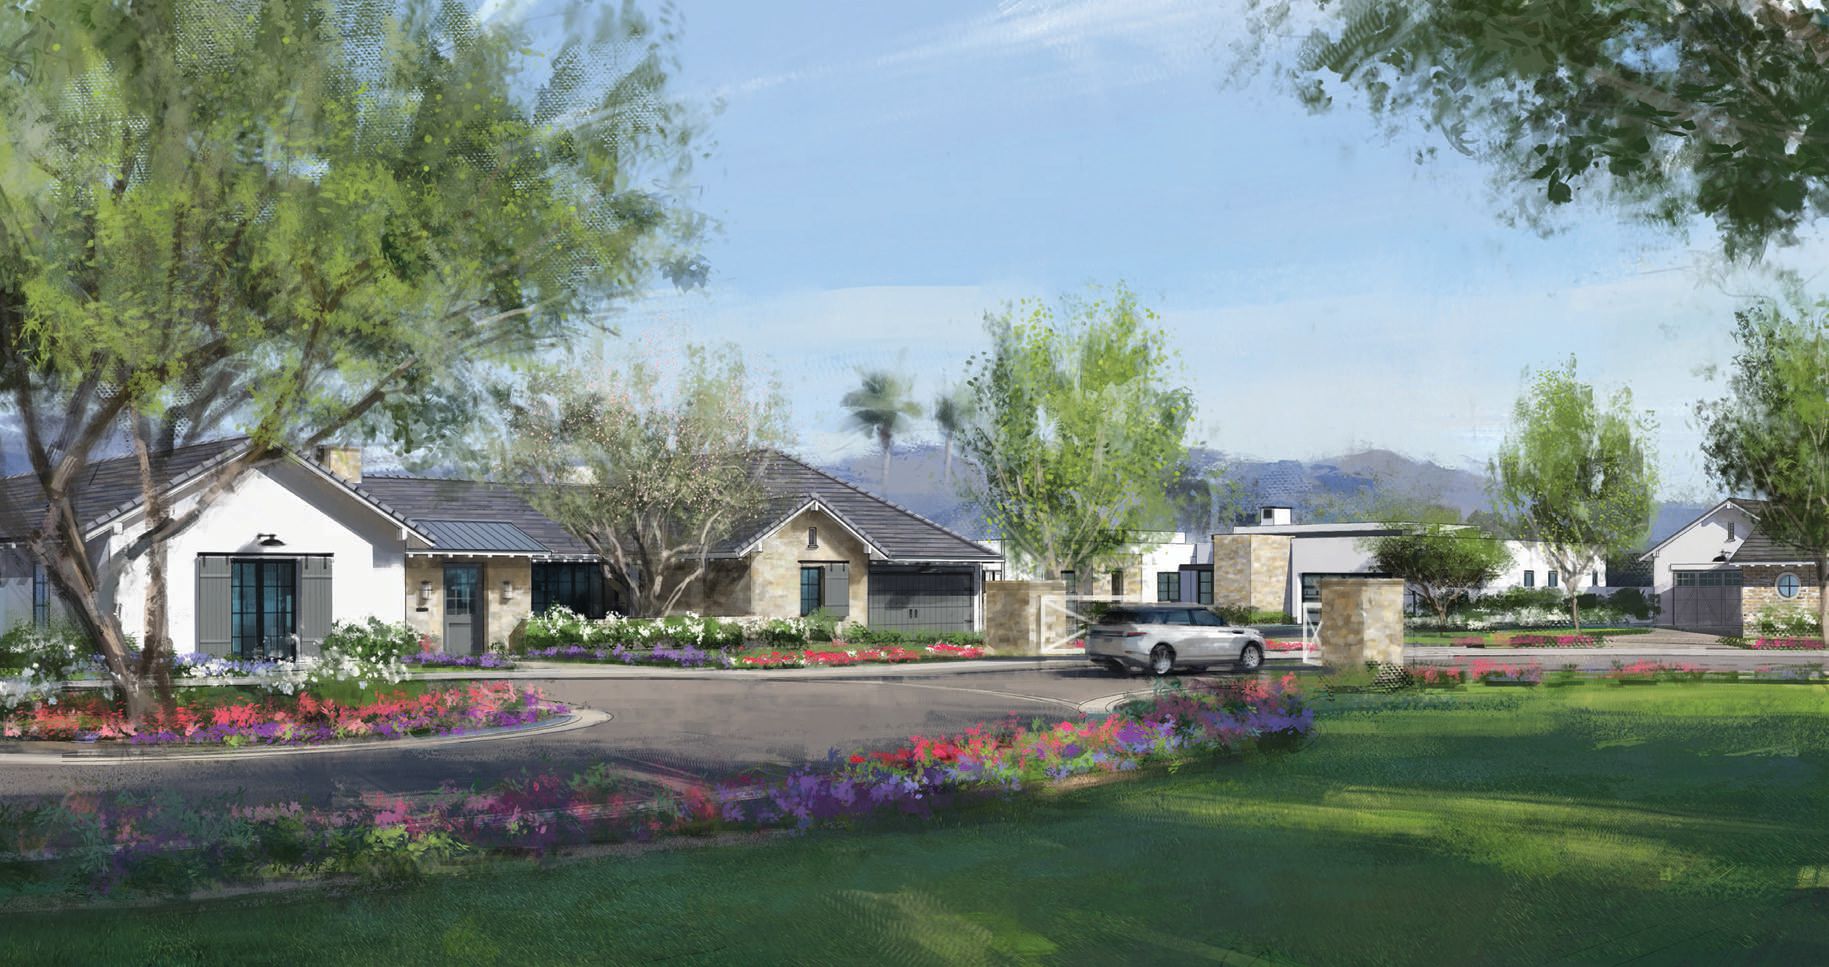 Camelot Homes’ new eight-home community, The Collection PHOTO COURTESY OF CAMELOT HOMES